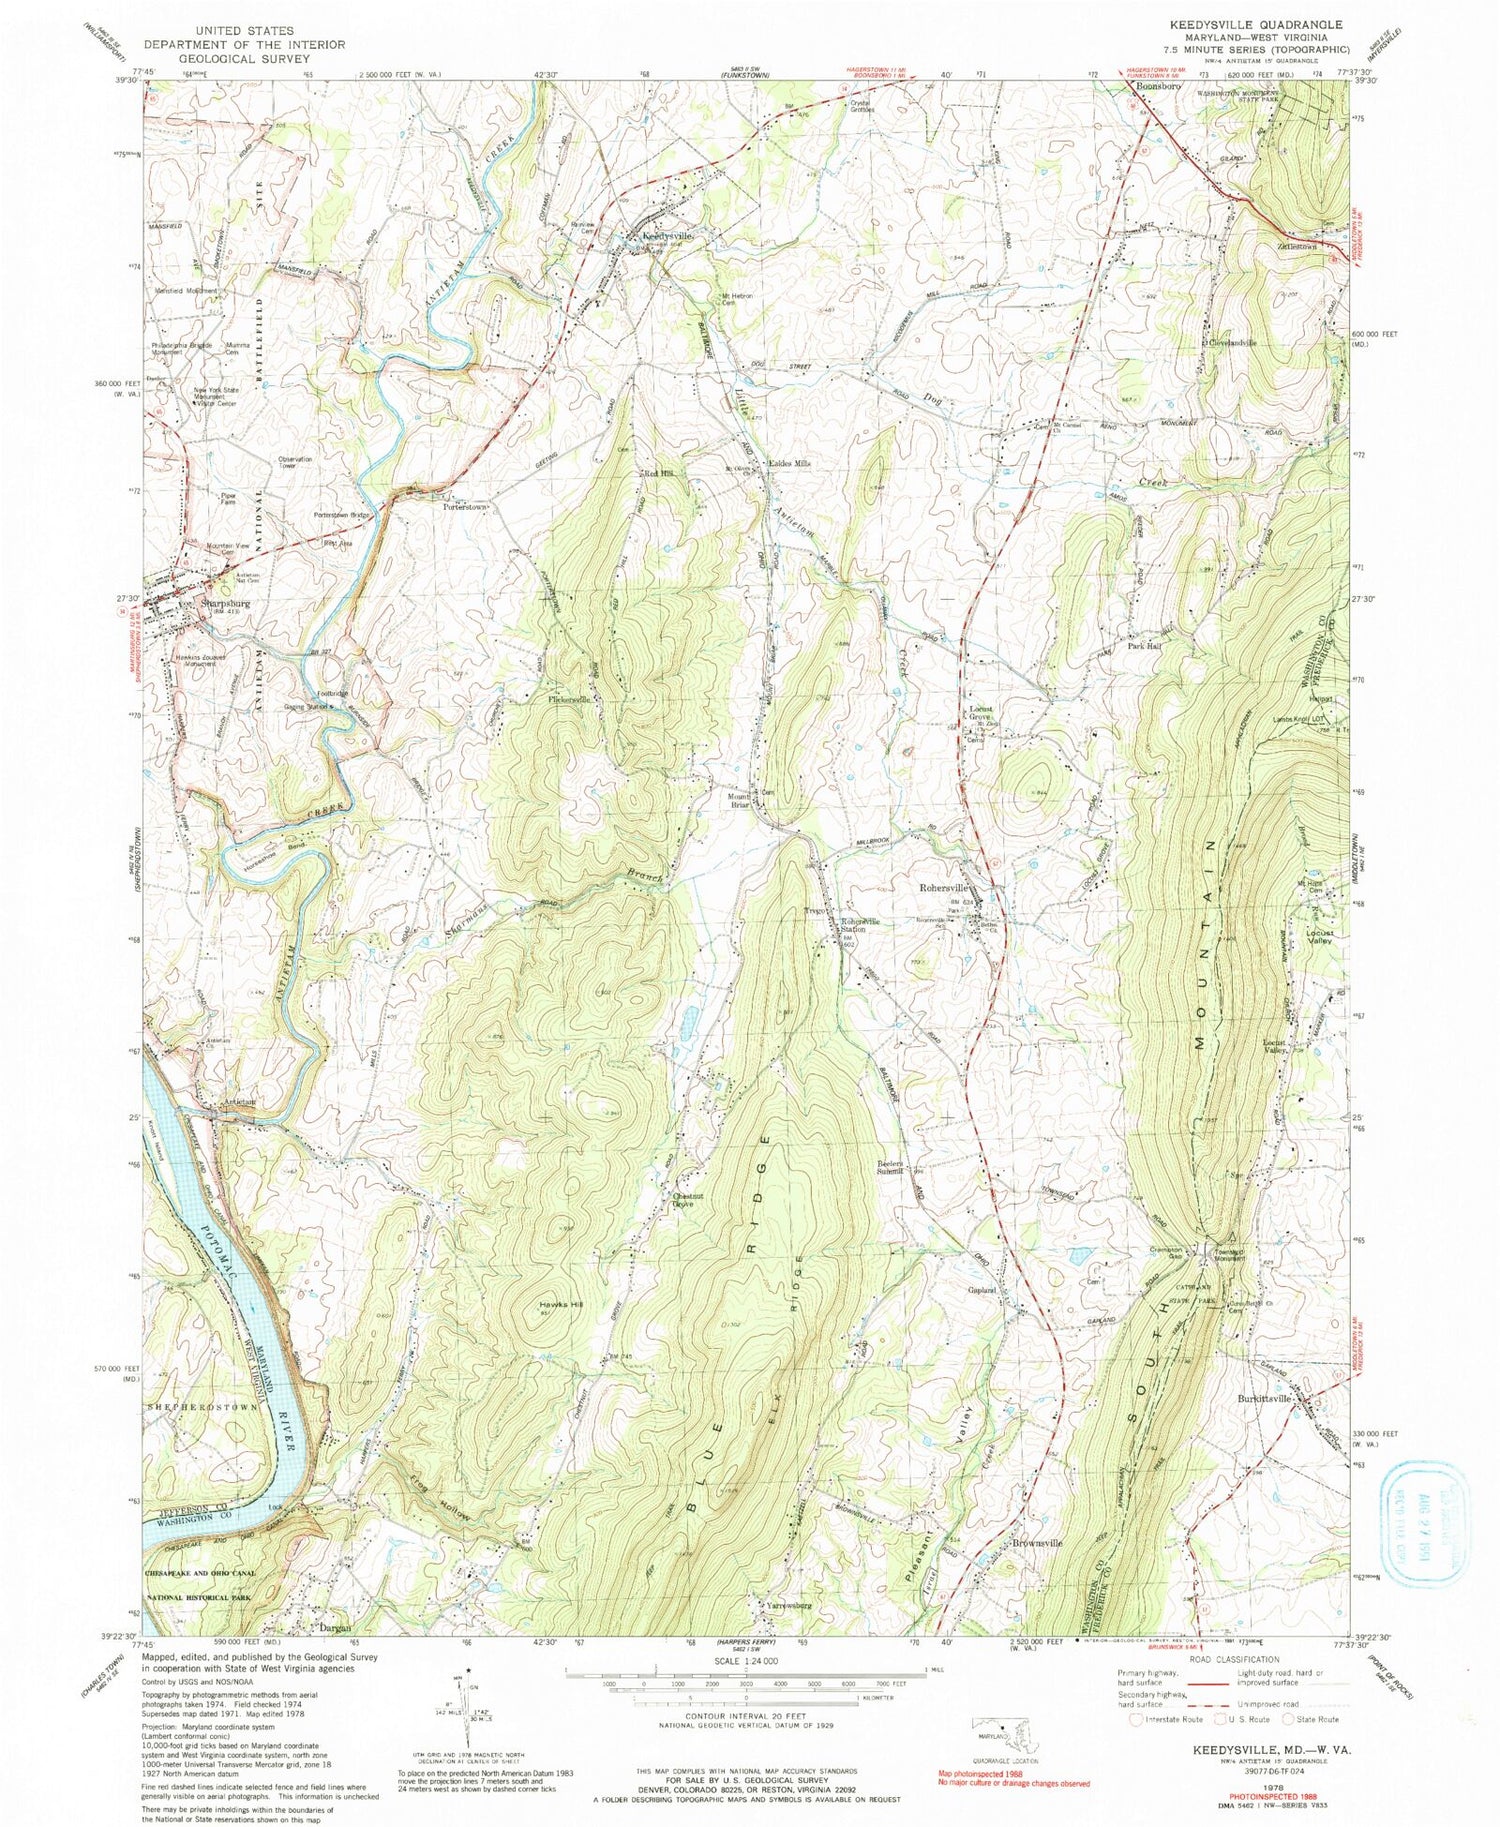 USGS Classic Keedysville Maryland 7.5'x7.5' Topo Map Image